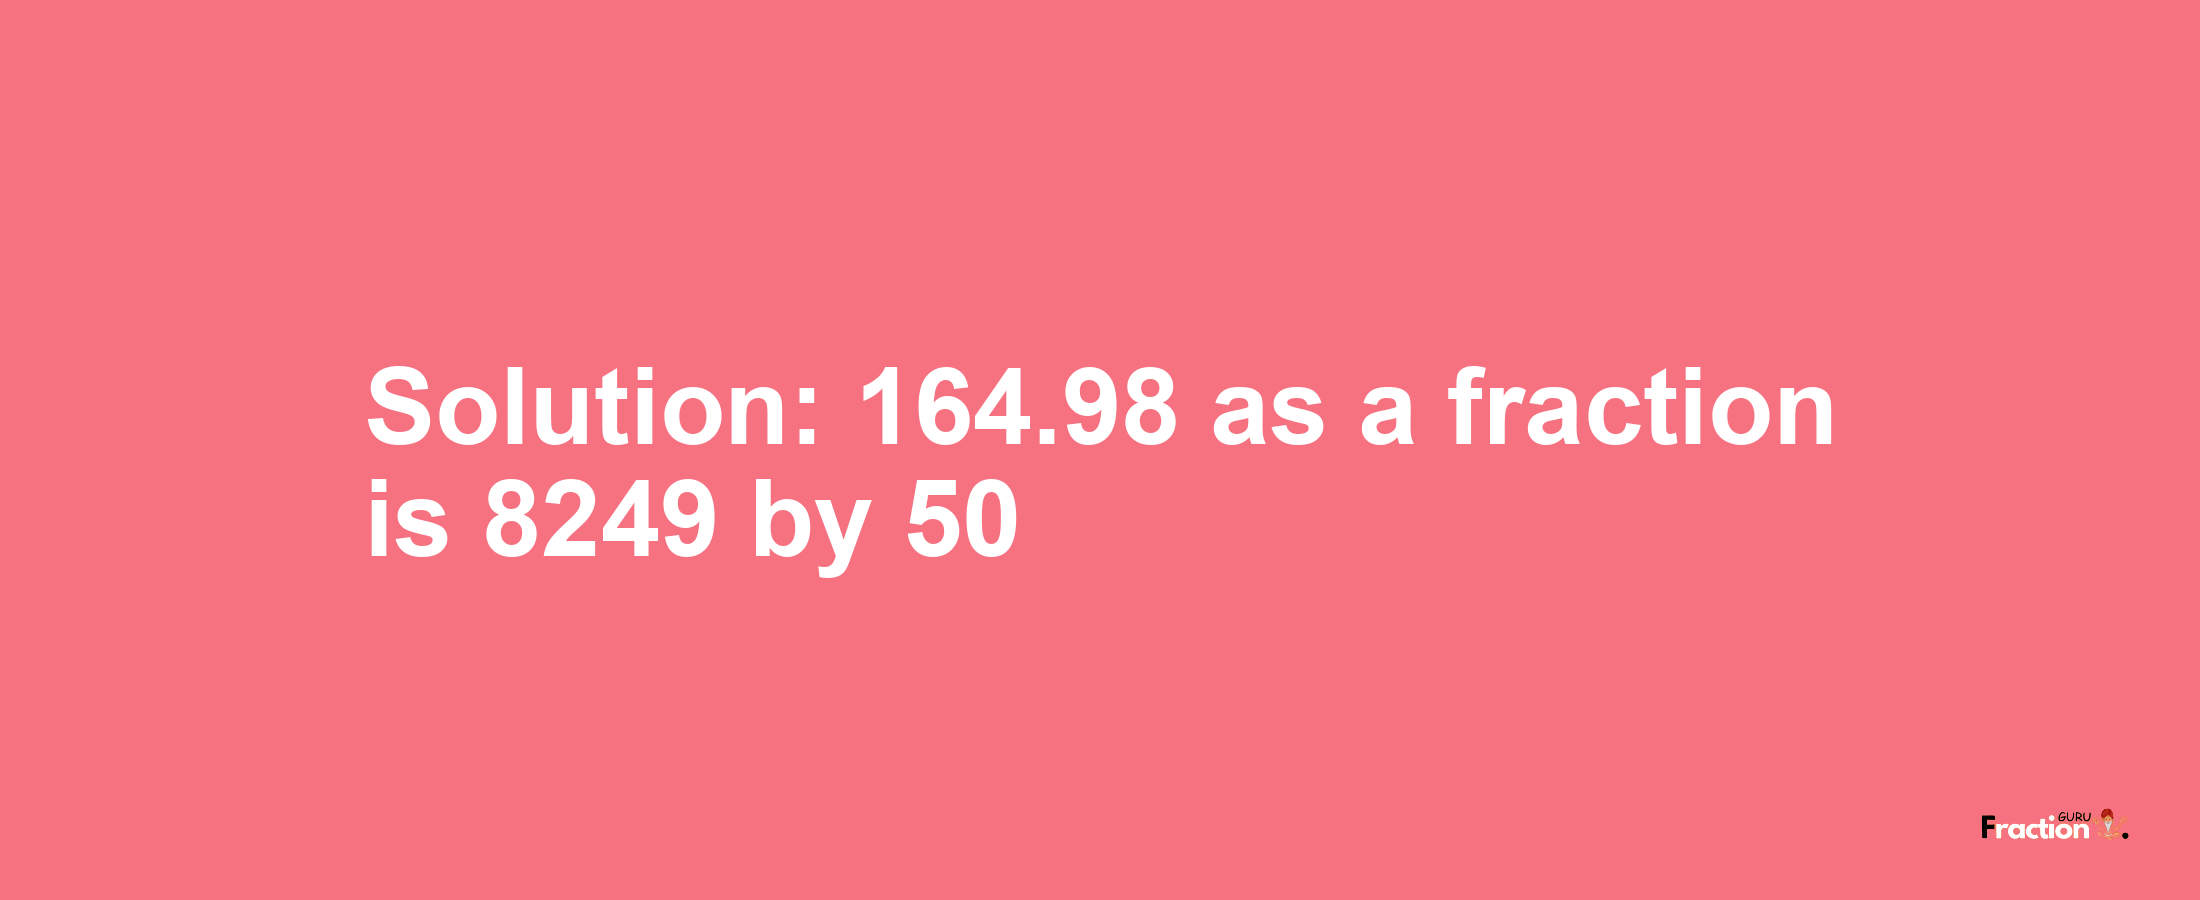 Solution:164.98 as a fraction is 8249/50